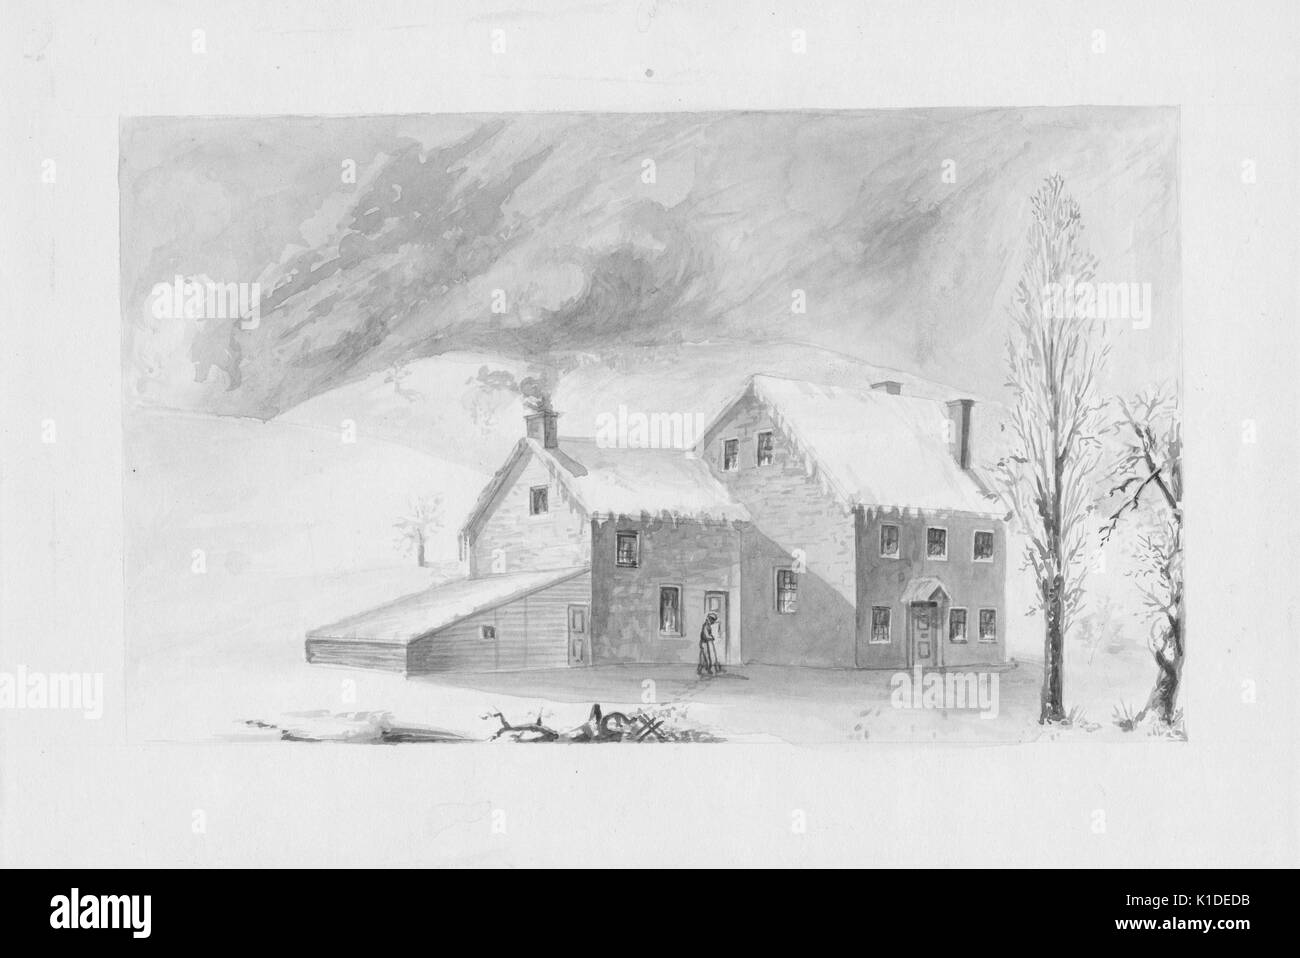 An illustration depicting George Washington's Headquarters, in the Isaac Potts House, during the winter 1777-1778, Valley Forge, Pennsylvania, 1777. From the New York Public Library. Stock Photo